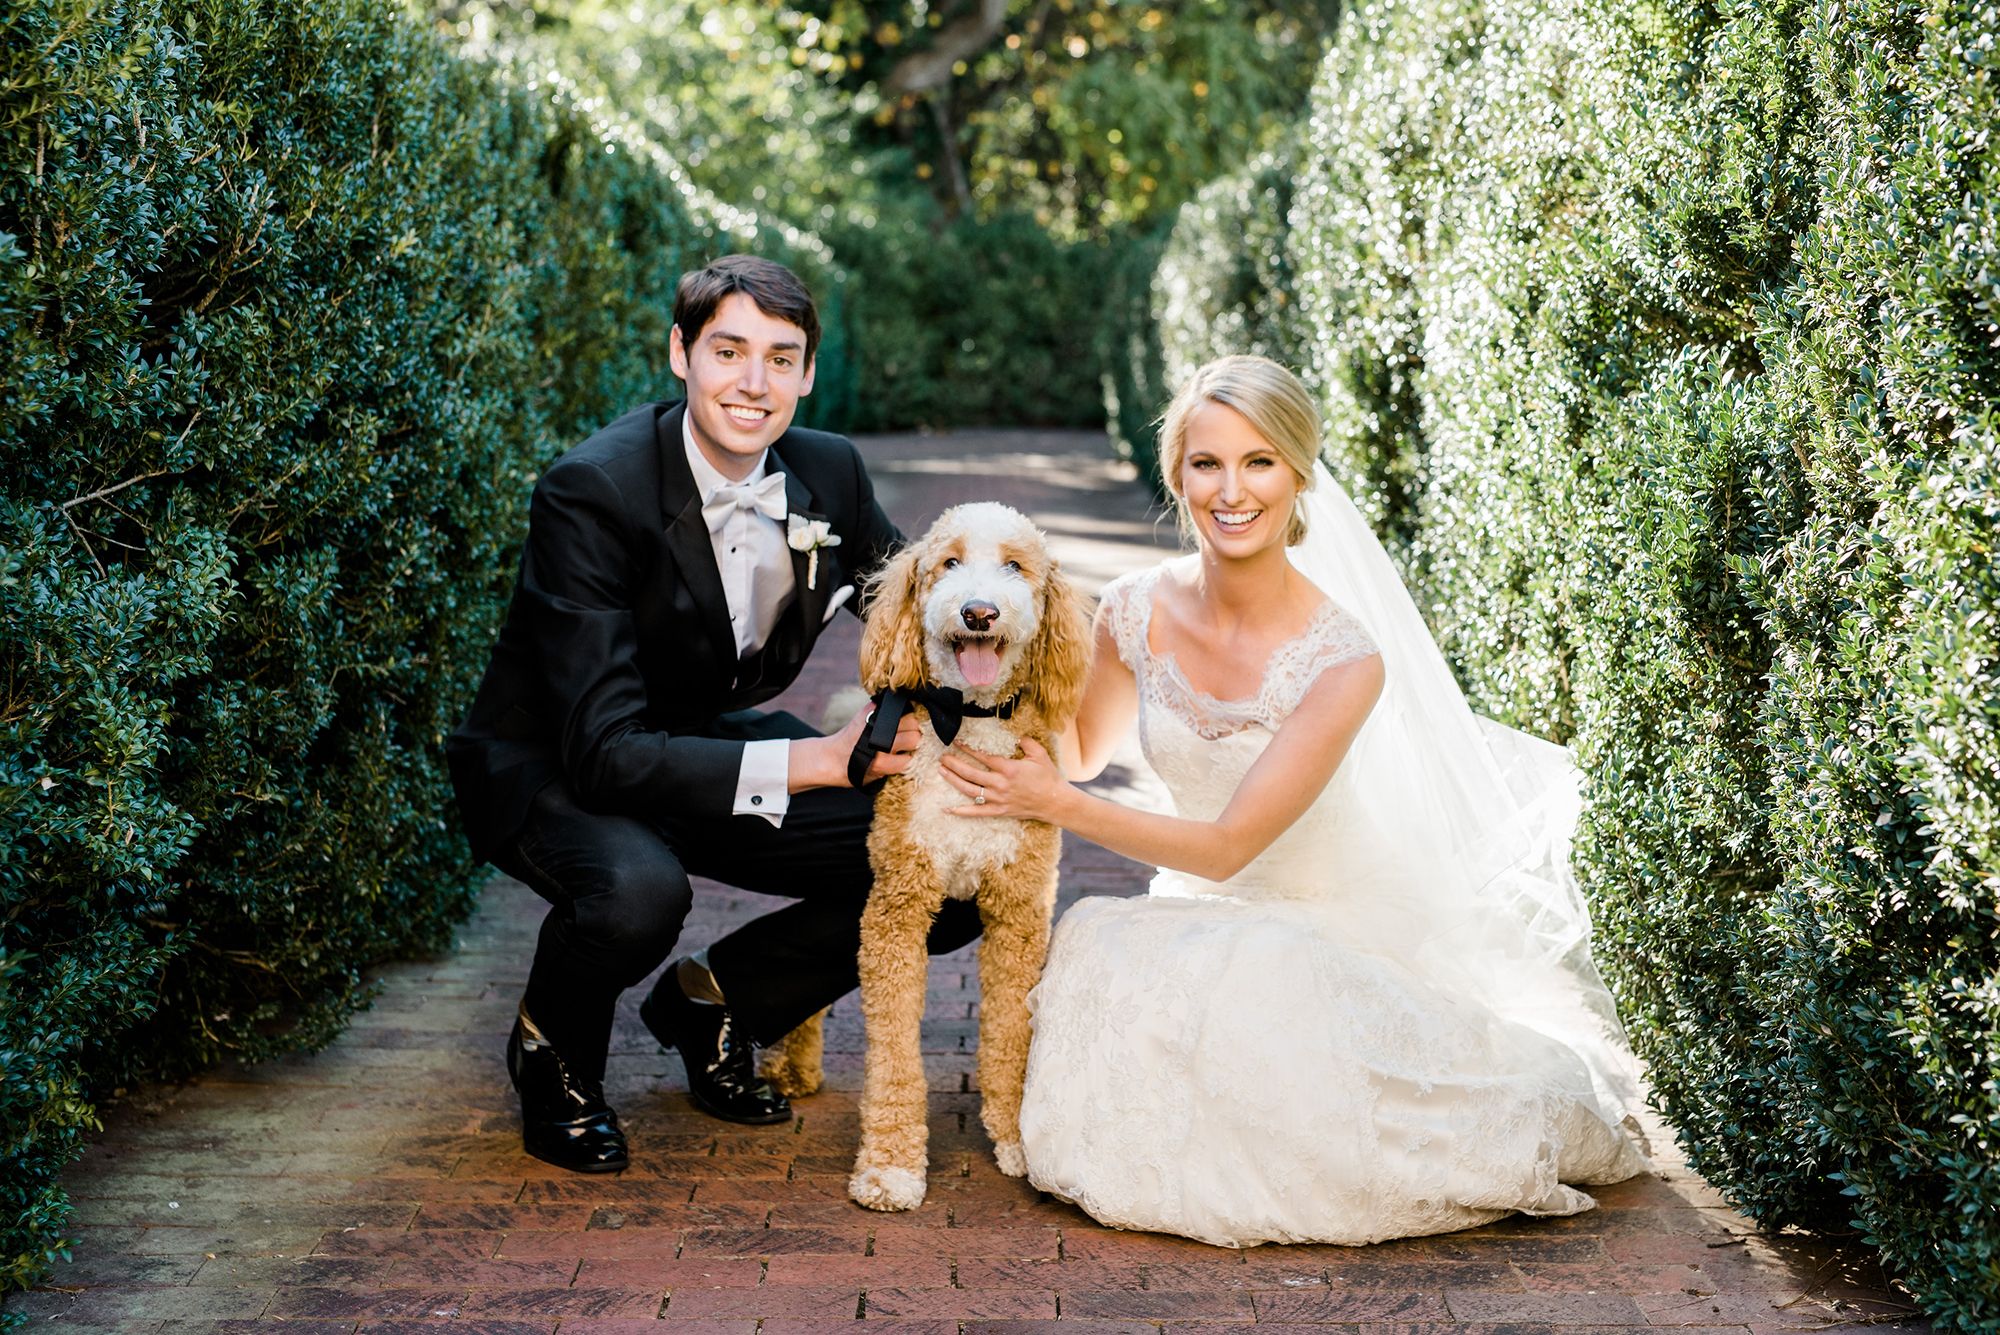 photo of a groom in a black tuxedo and bride outside crouching and smiling next to a poodle